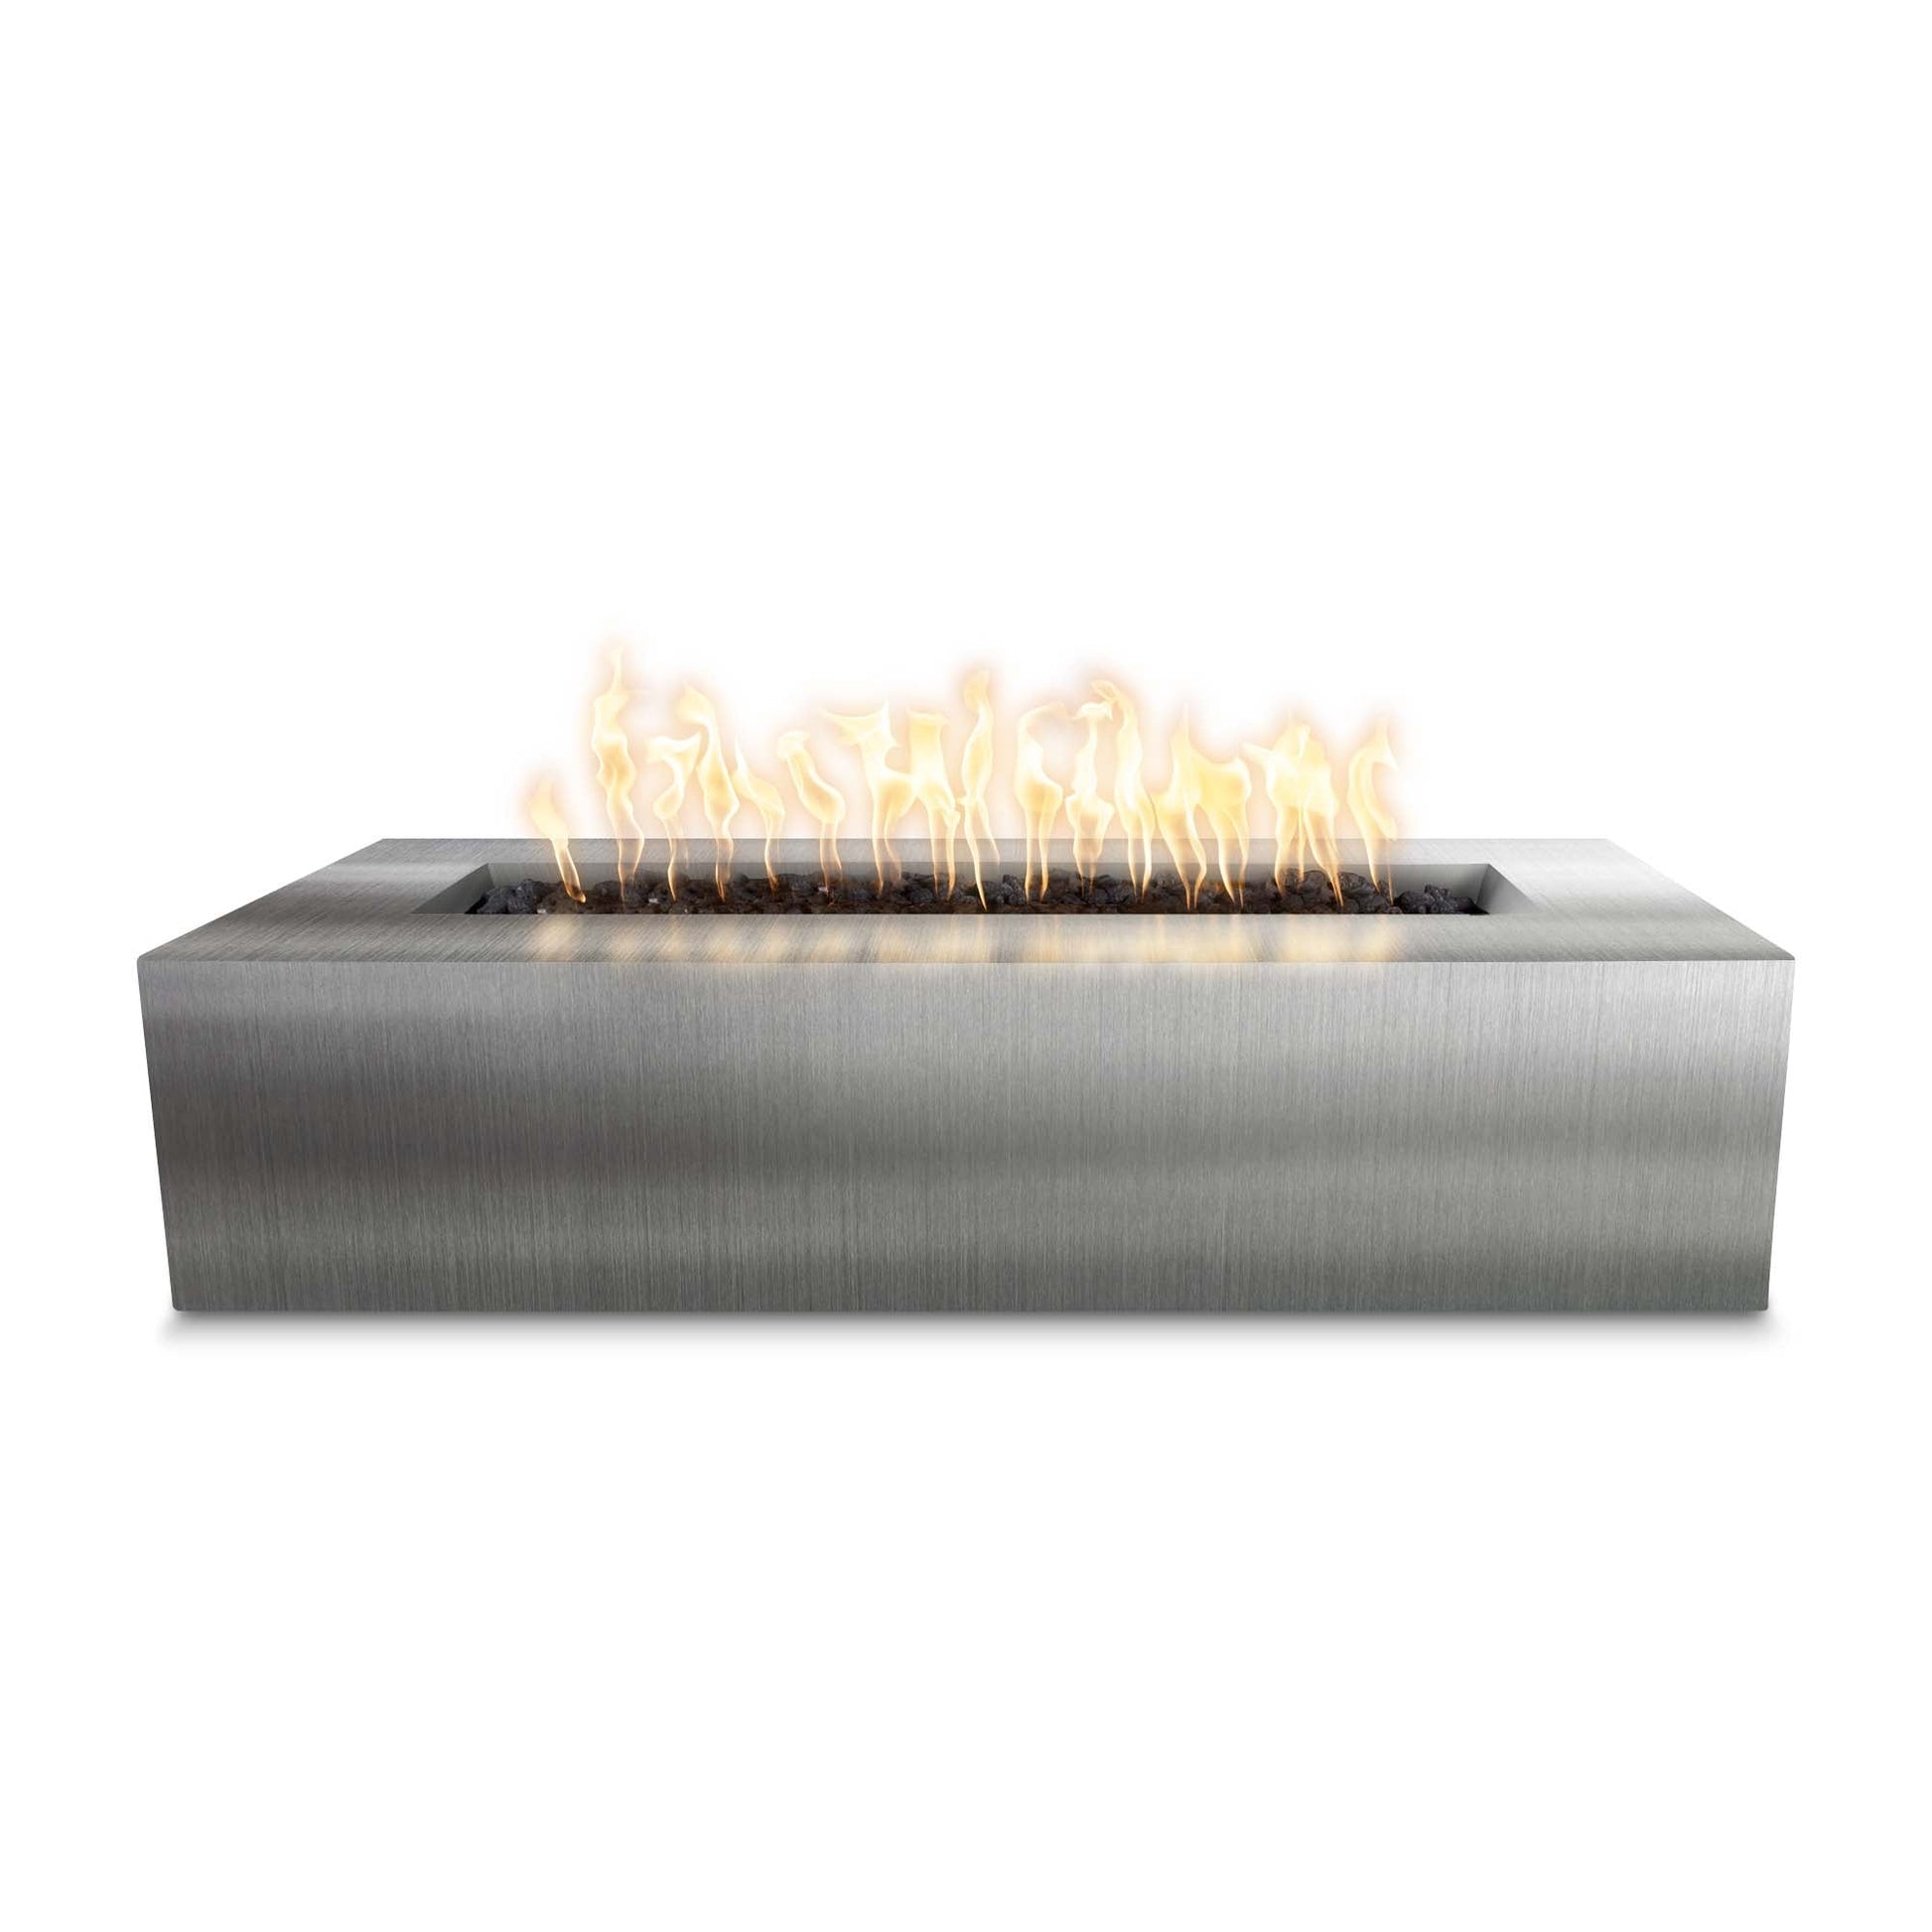 The Outdoor Plus Rectangular Regal 48" Hammered Copper Liquid Propane Fire Pit with Match Lit Ignition